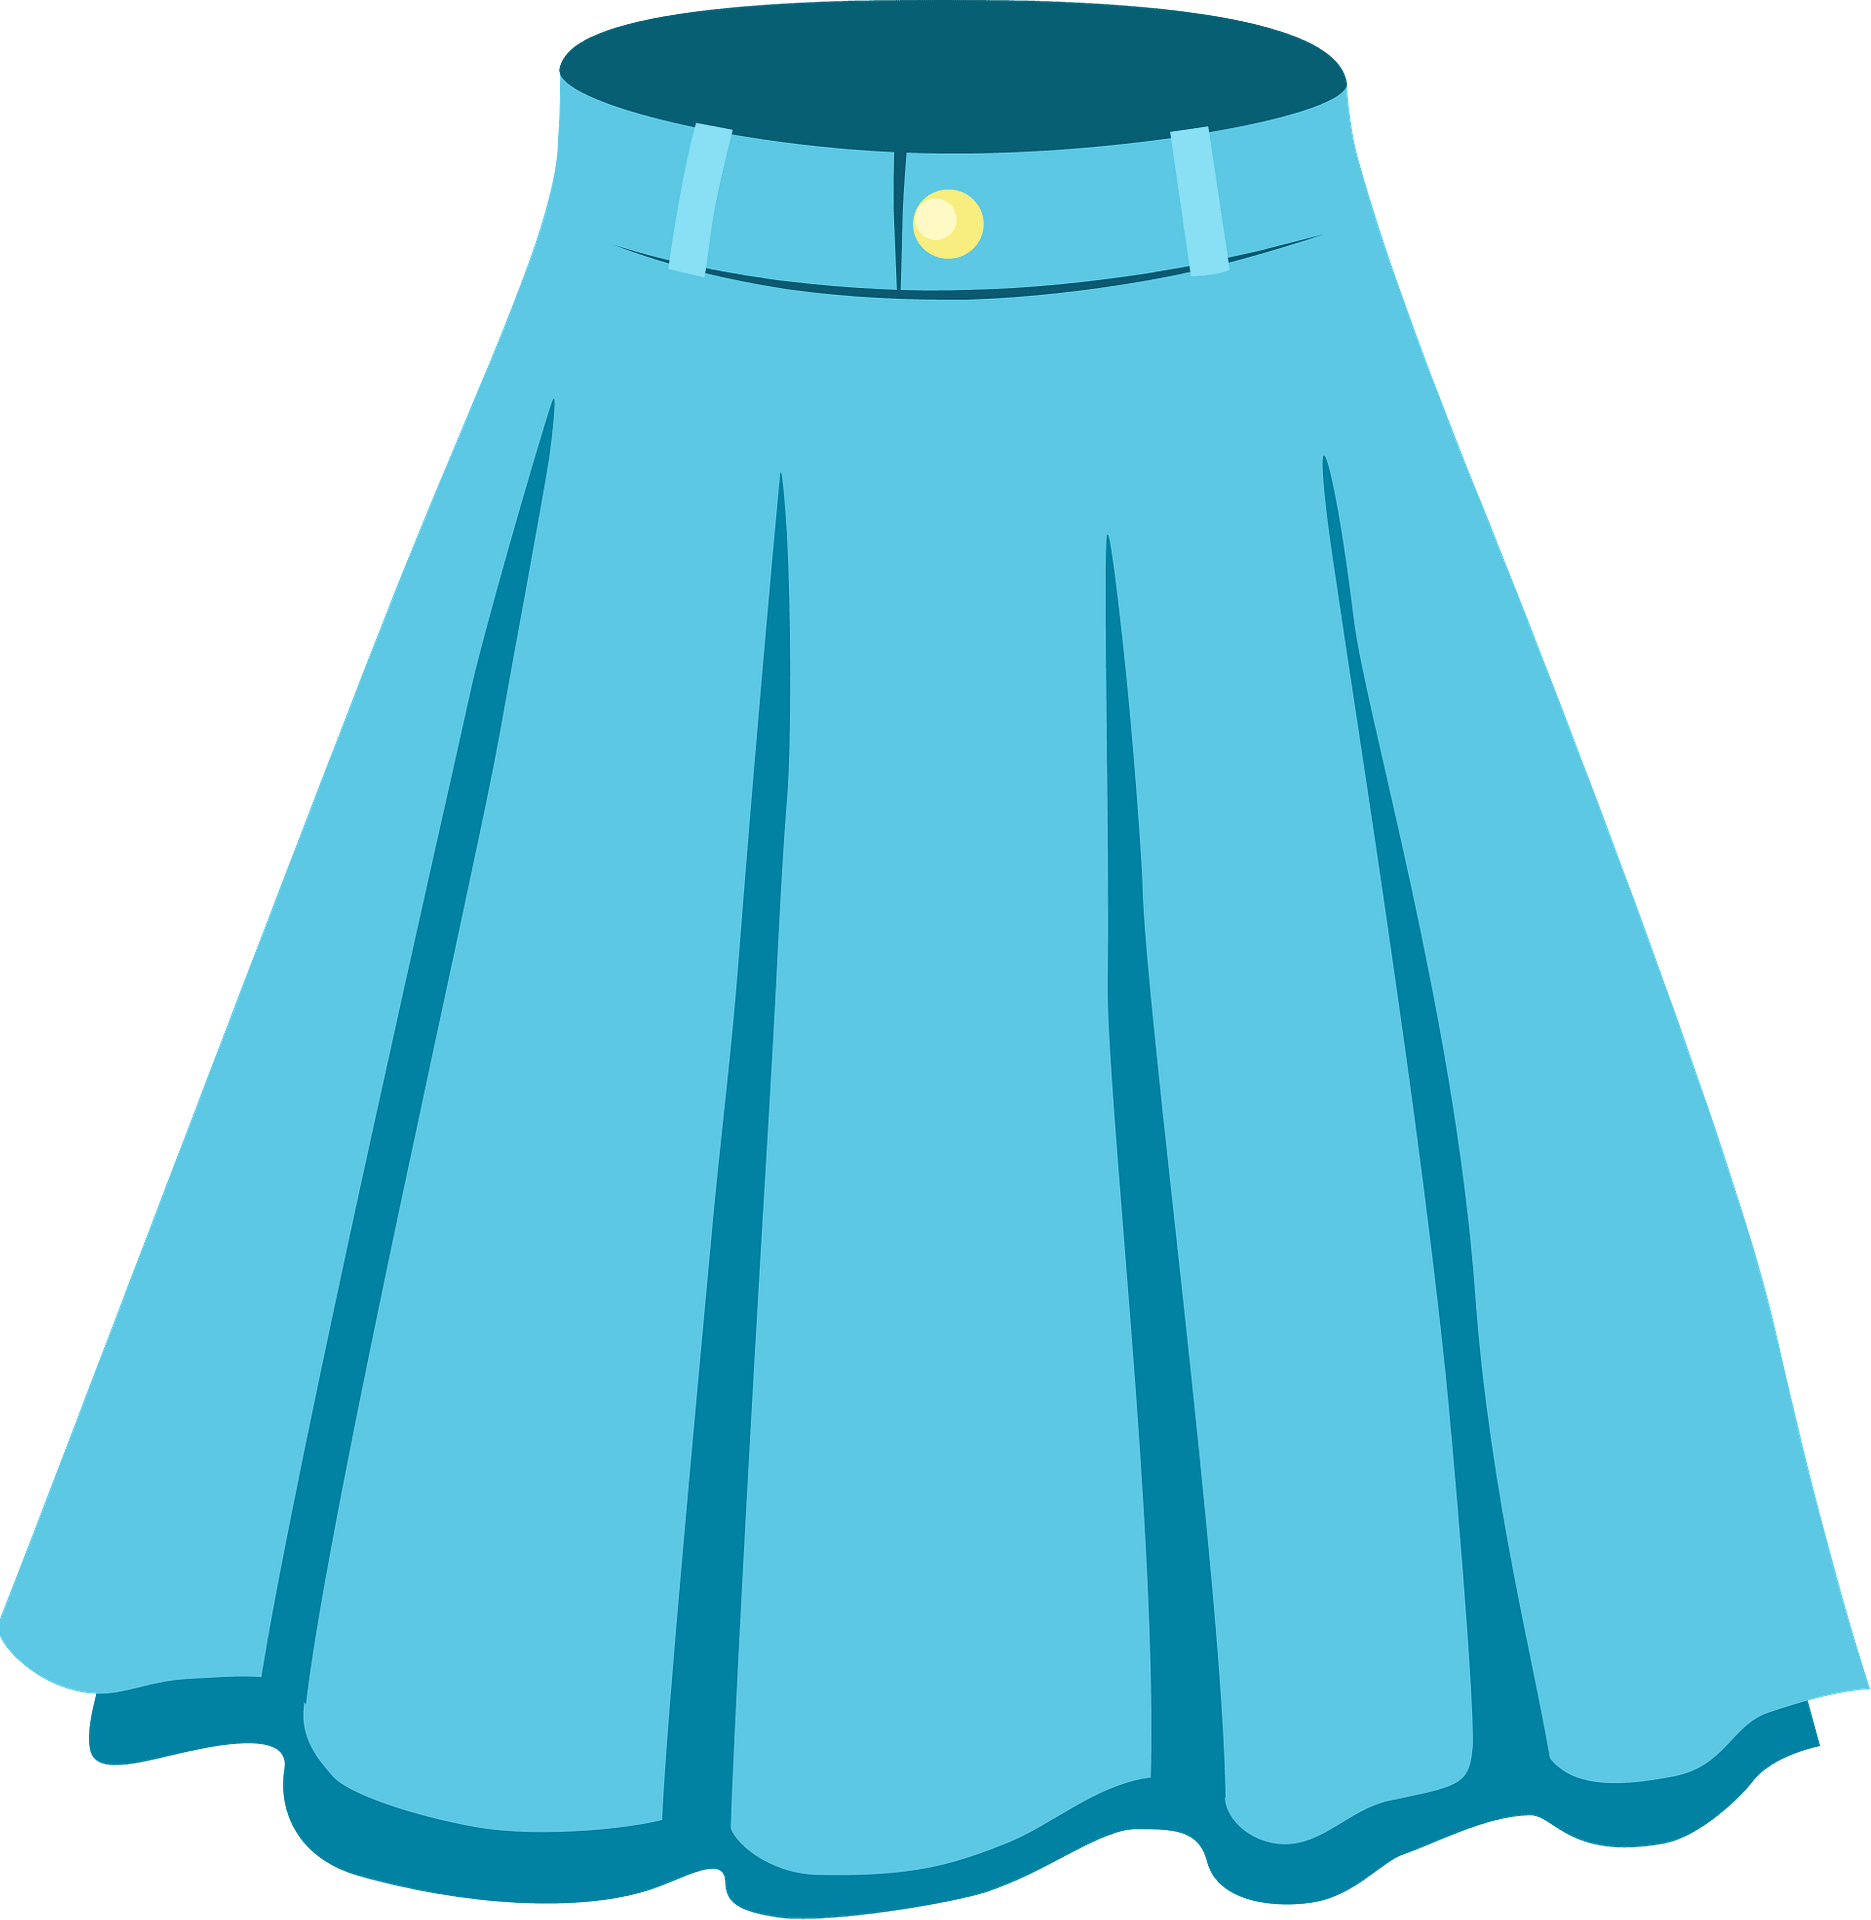 Skirts png - Download Free Png Images